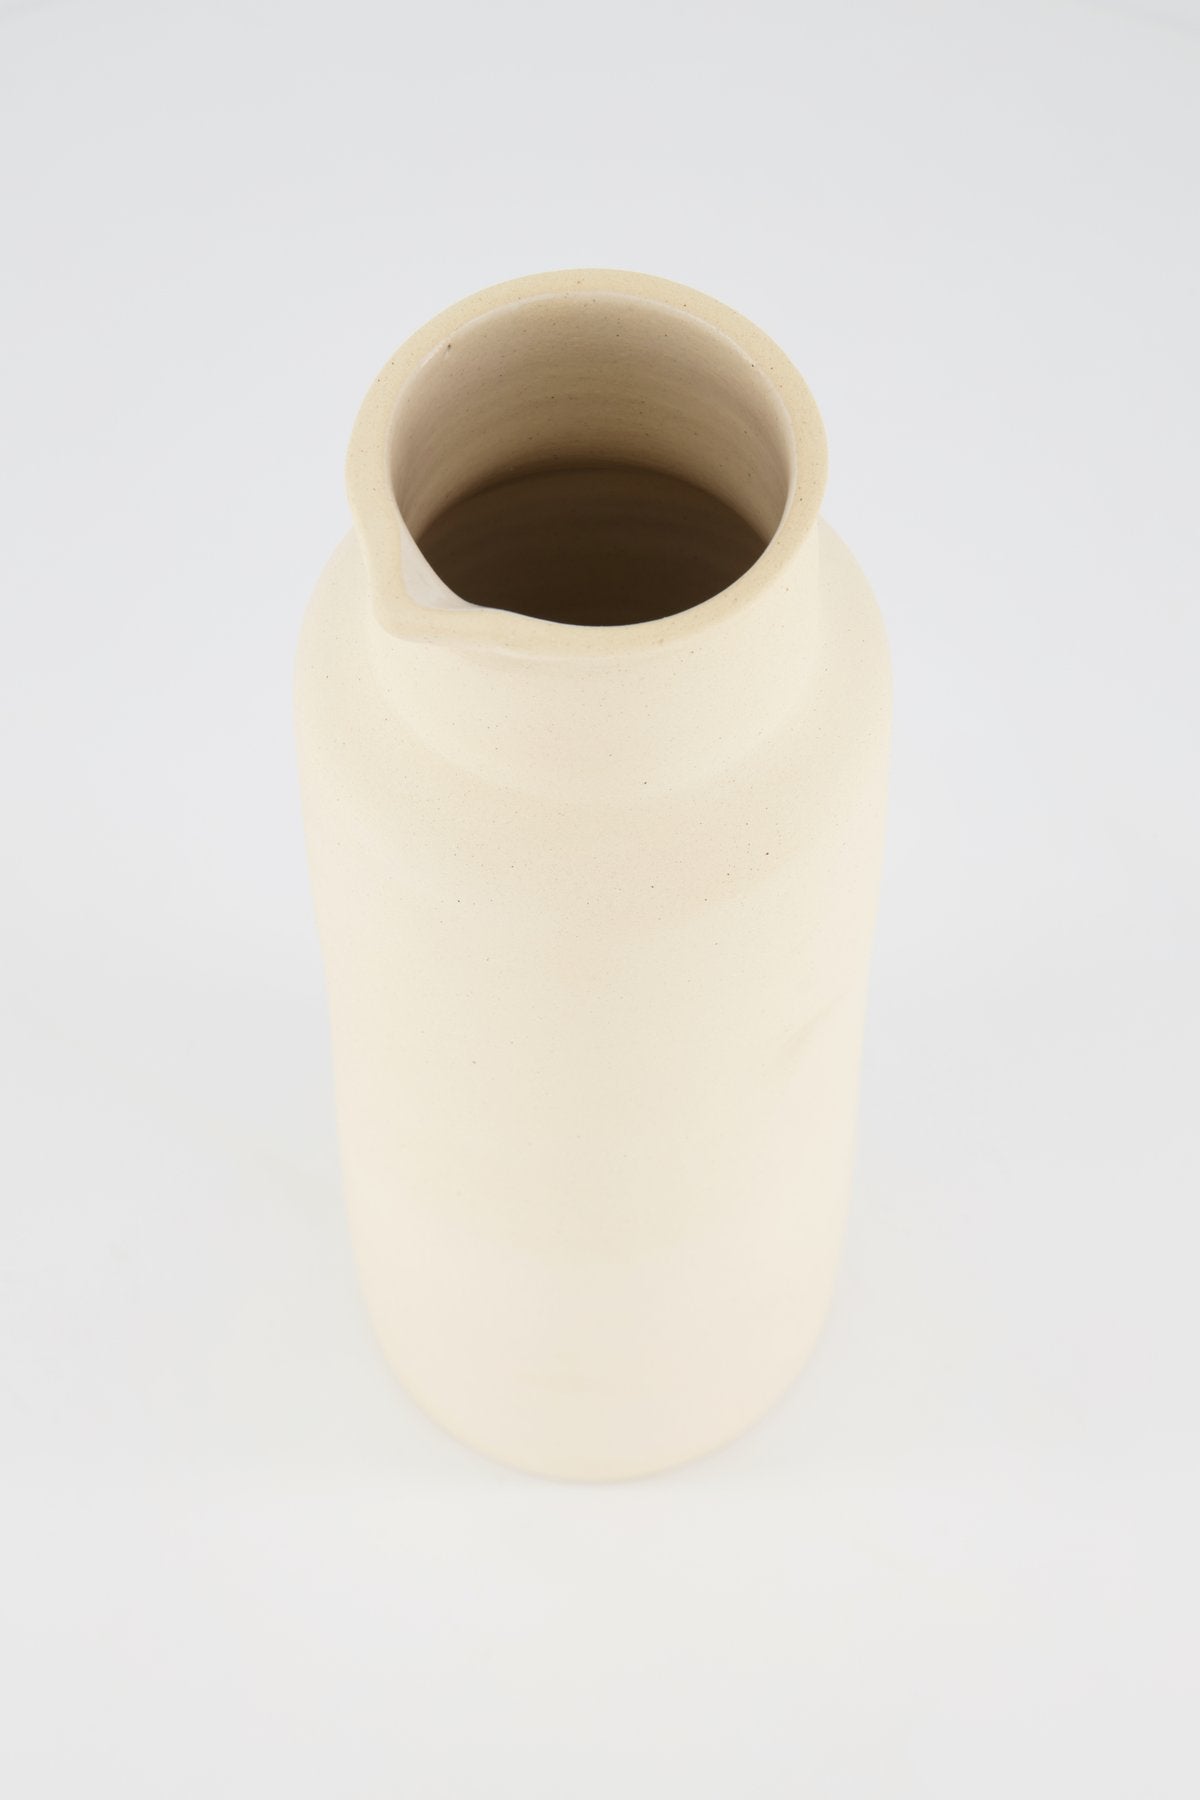 Clay Water Pitcher - Ivory